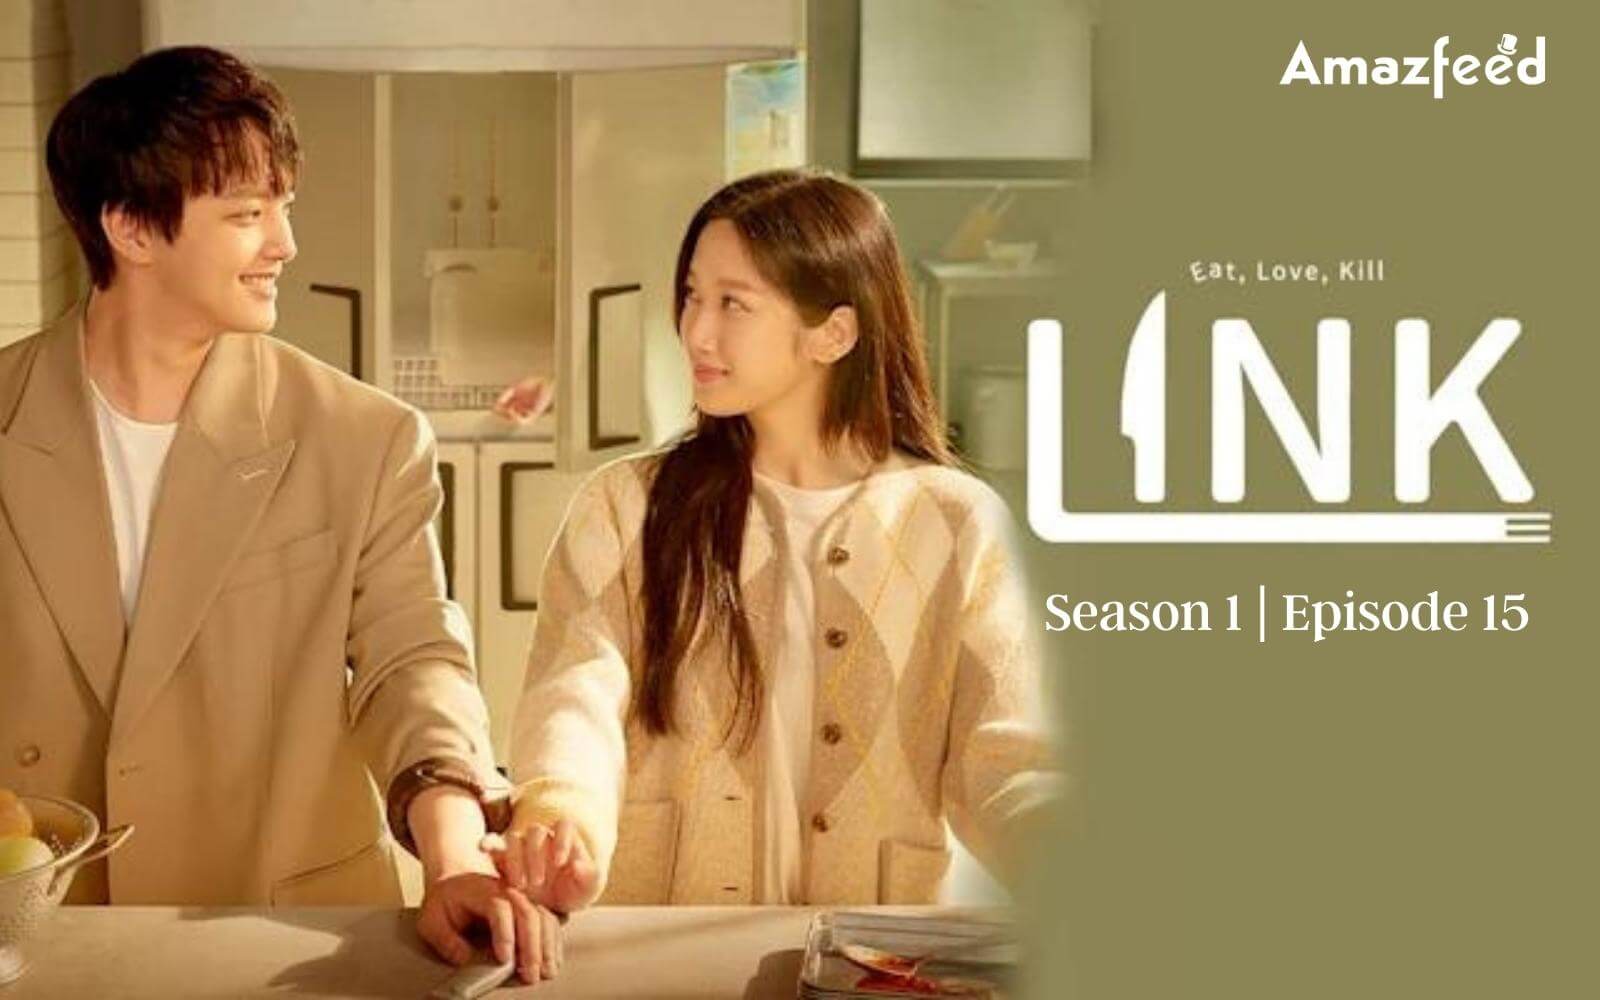 Link: Eat, Love, Kill Season 1 Episode 15: Countdown, Release Date, Spoiler, and Cast Everything You Need To Know